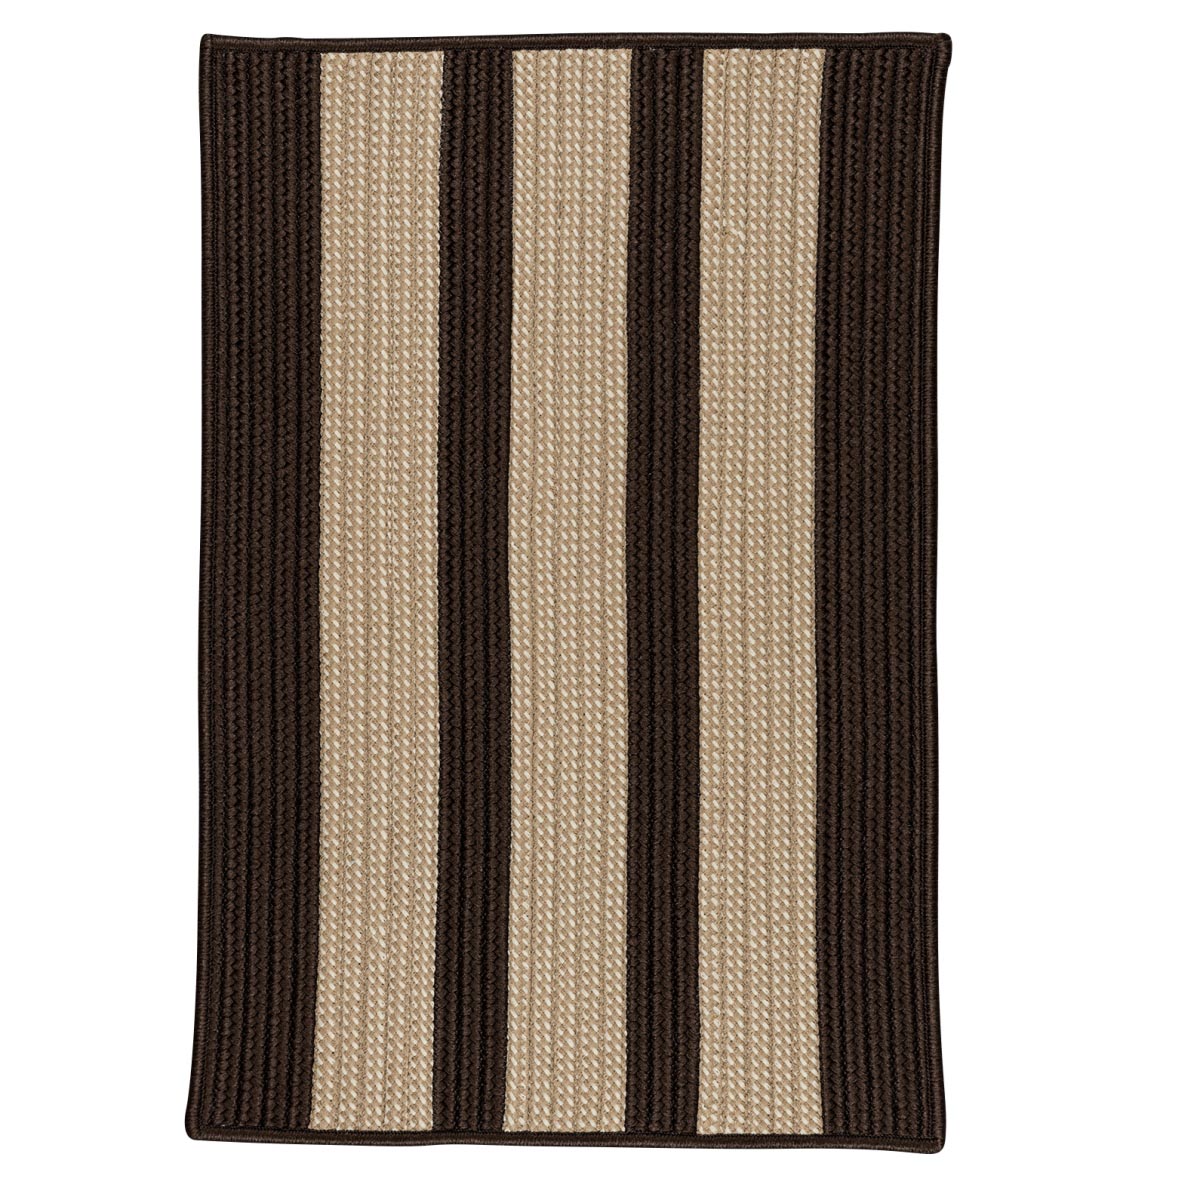 Boat House Brown Outdoor Braided Rectangular Rugs